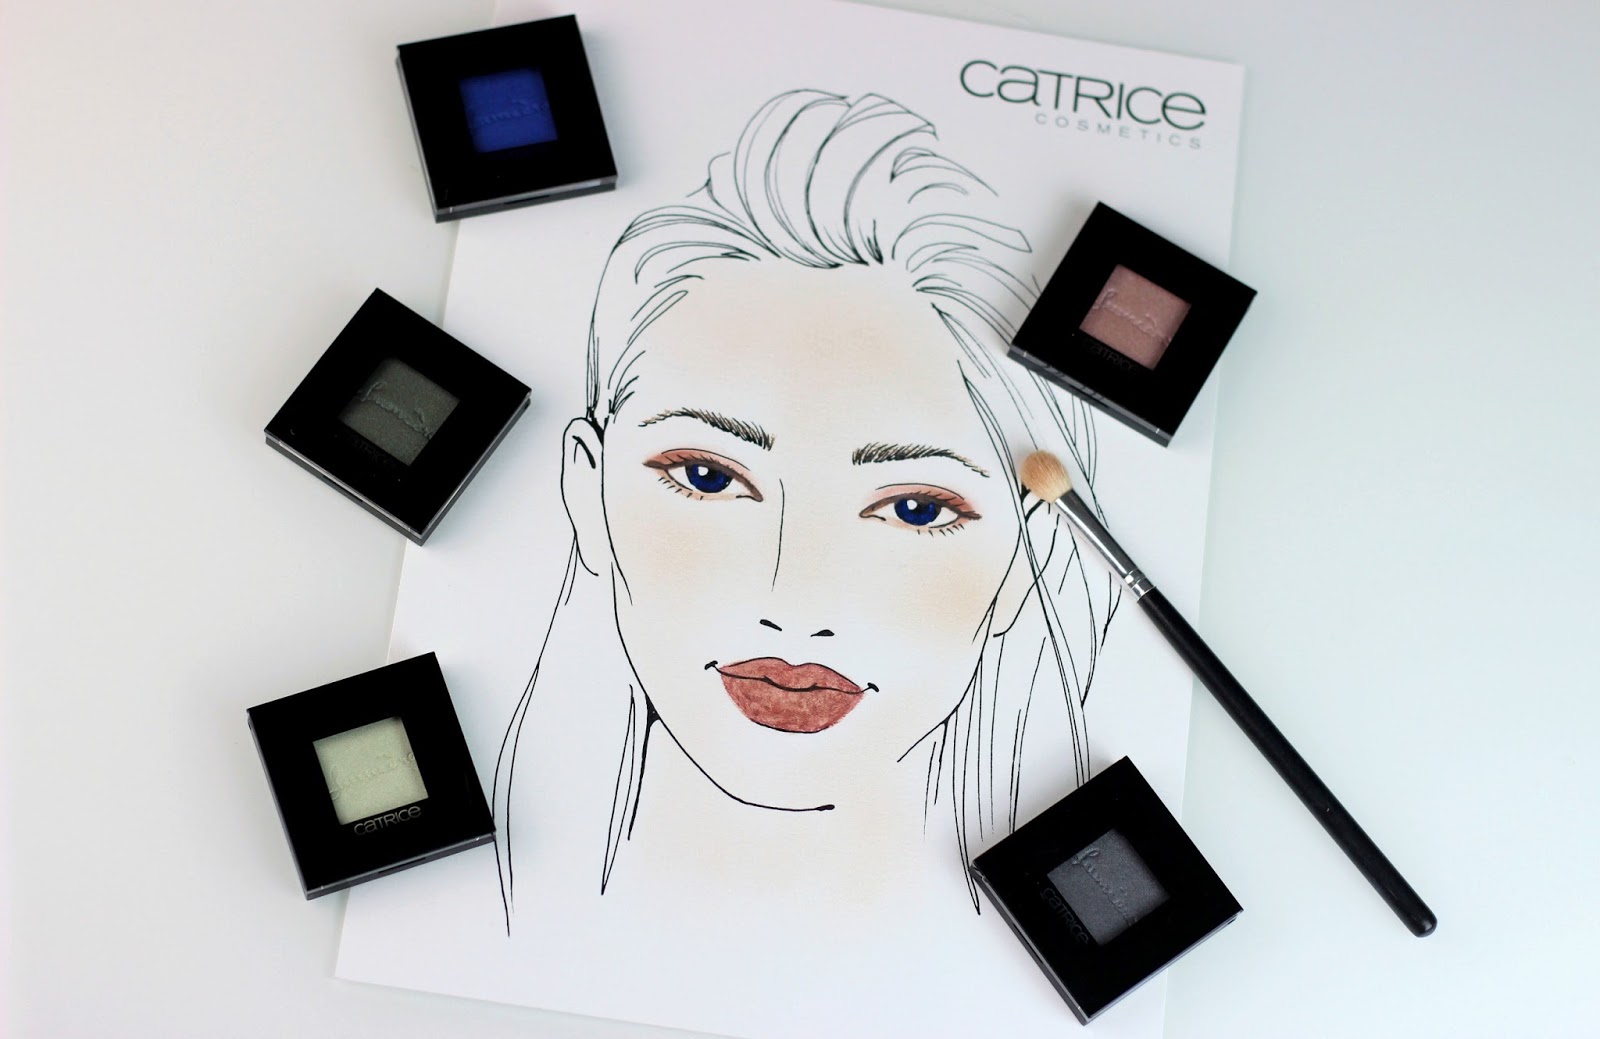 catrice, Prêt-à-Lumière Longlasting Eyeshadow, lidschatten, review, swatches, neues sortiment, 2016, herbst, farbtrends, drogerie, schimmer, longlasting eyeshadow, Prêt-à-Lumière, nude, cosmetics, look, 